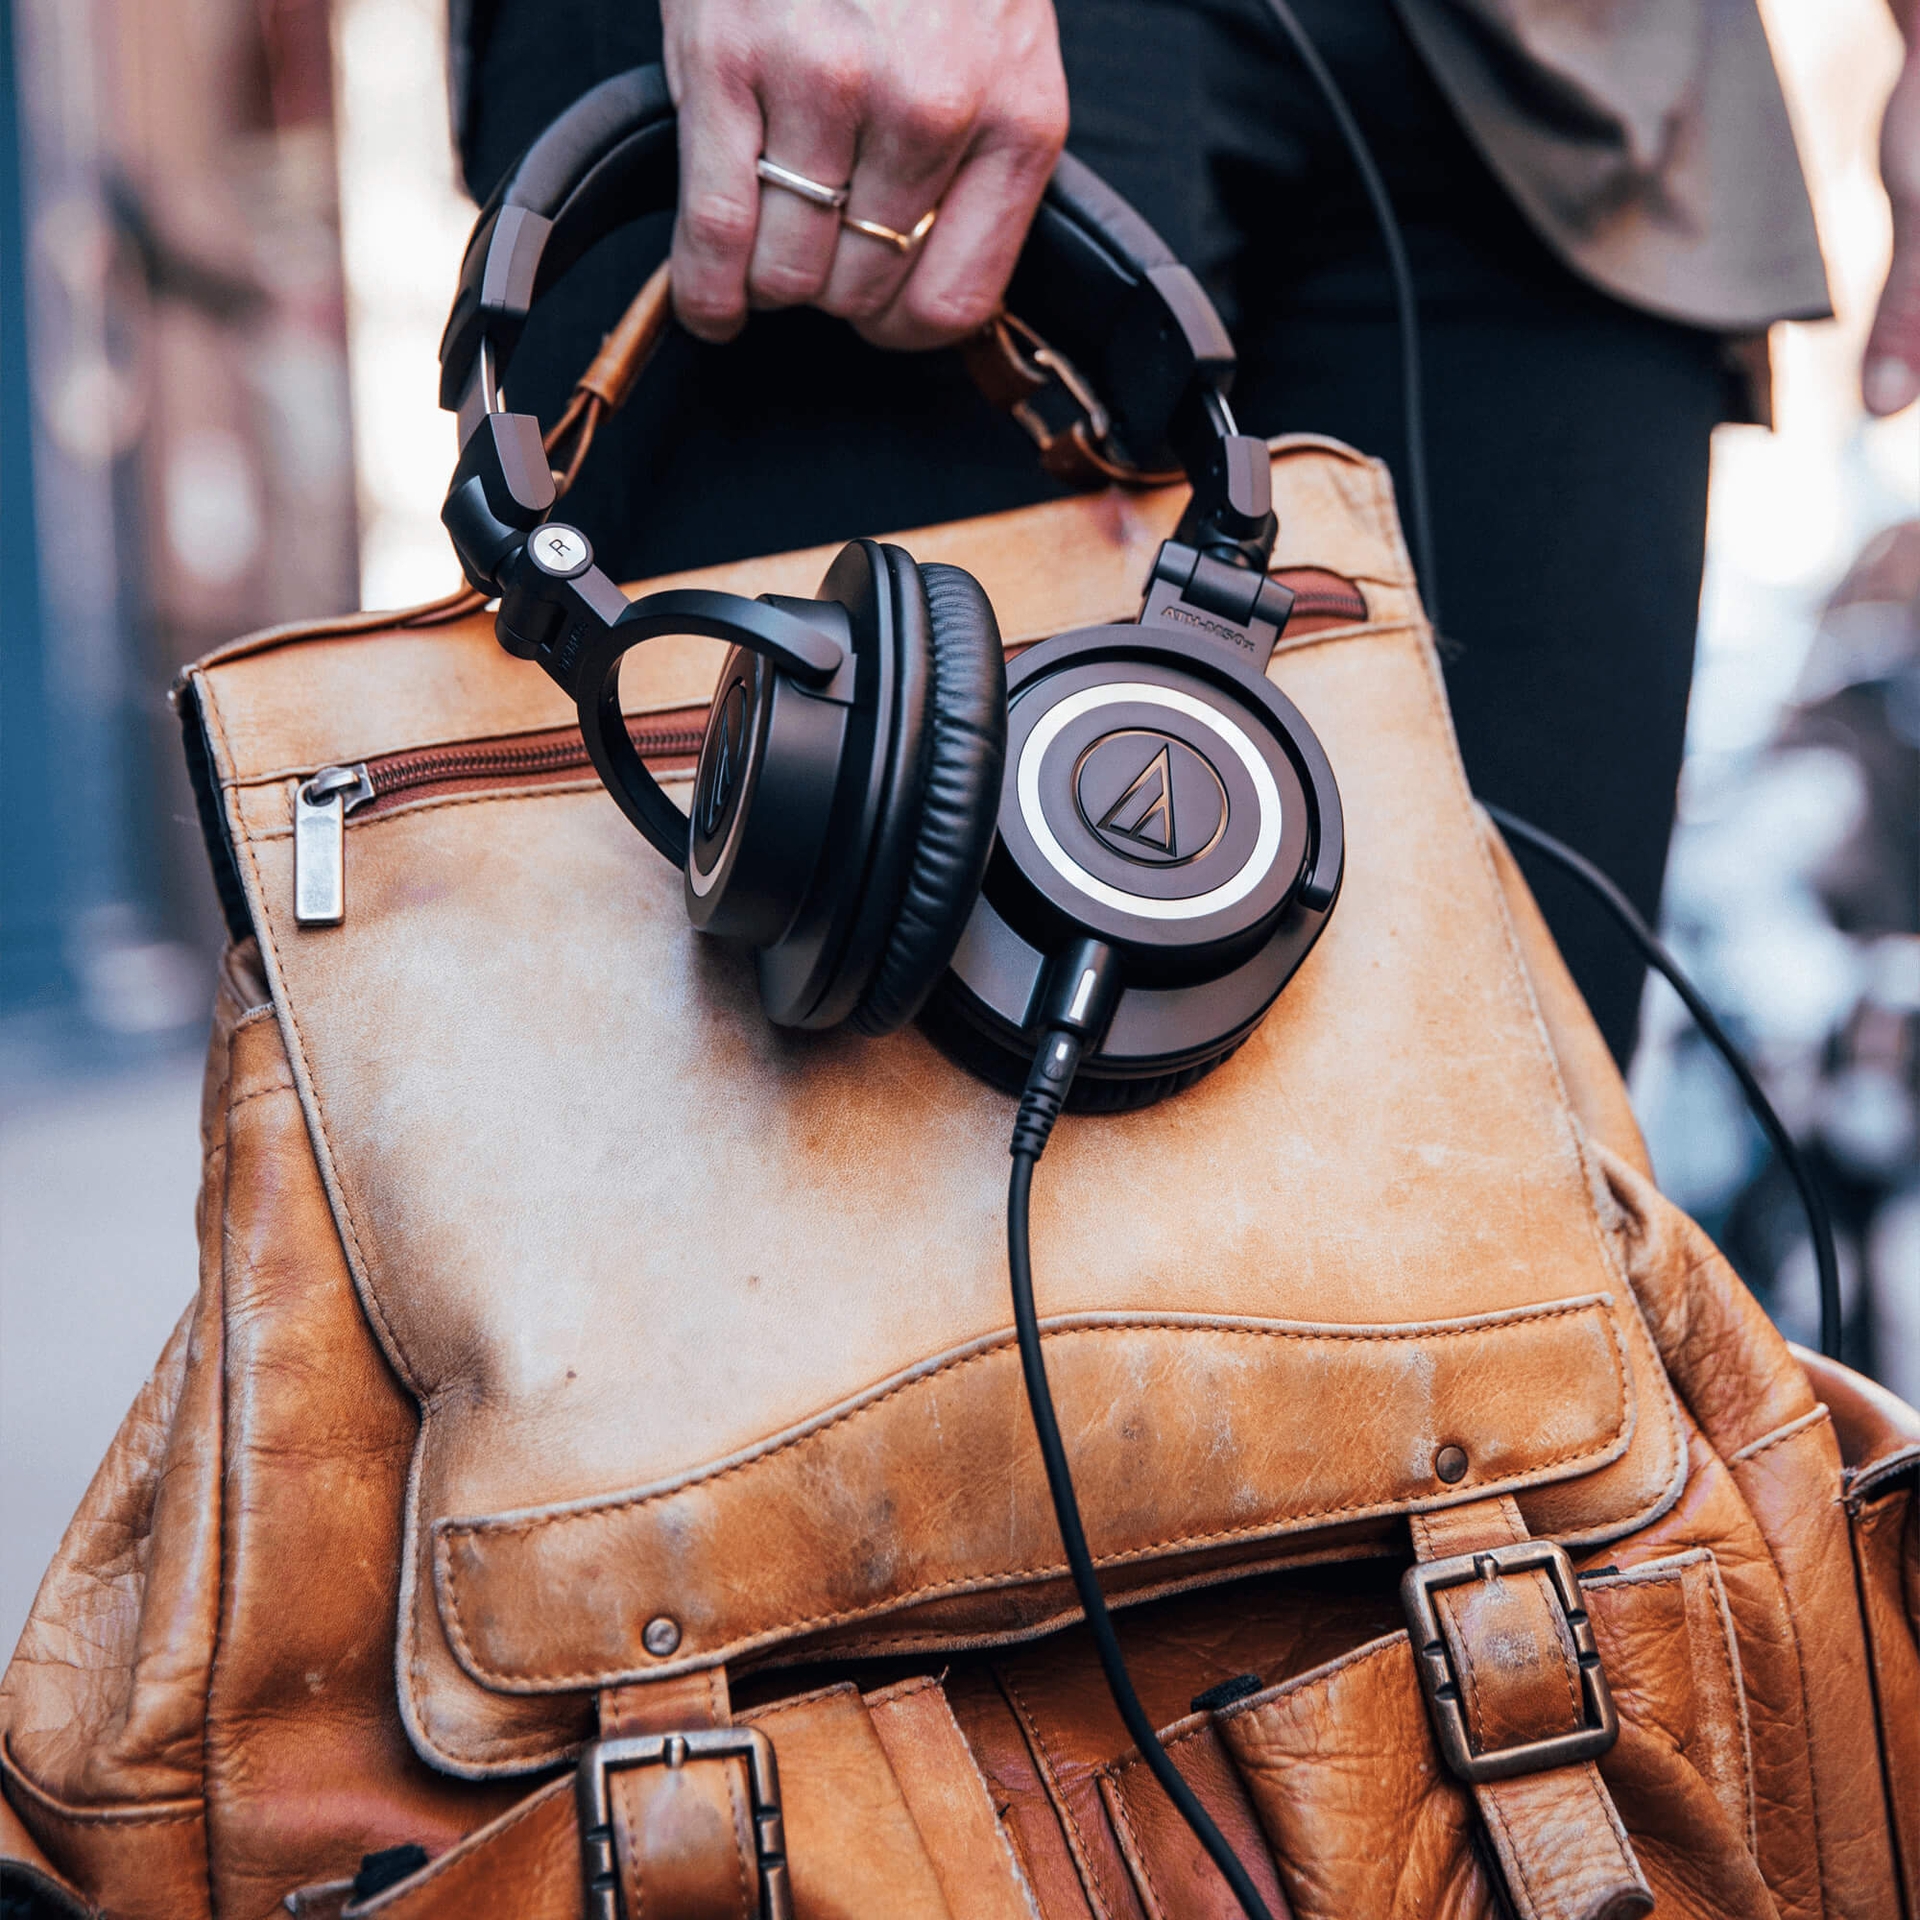 Audio-Technica ATH-M50x carried with a leather bag